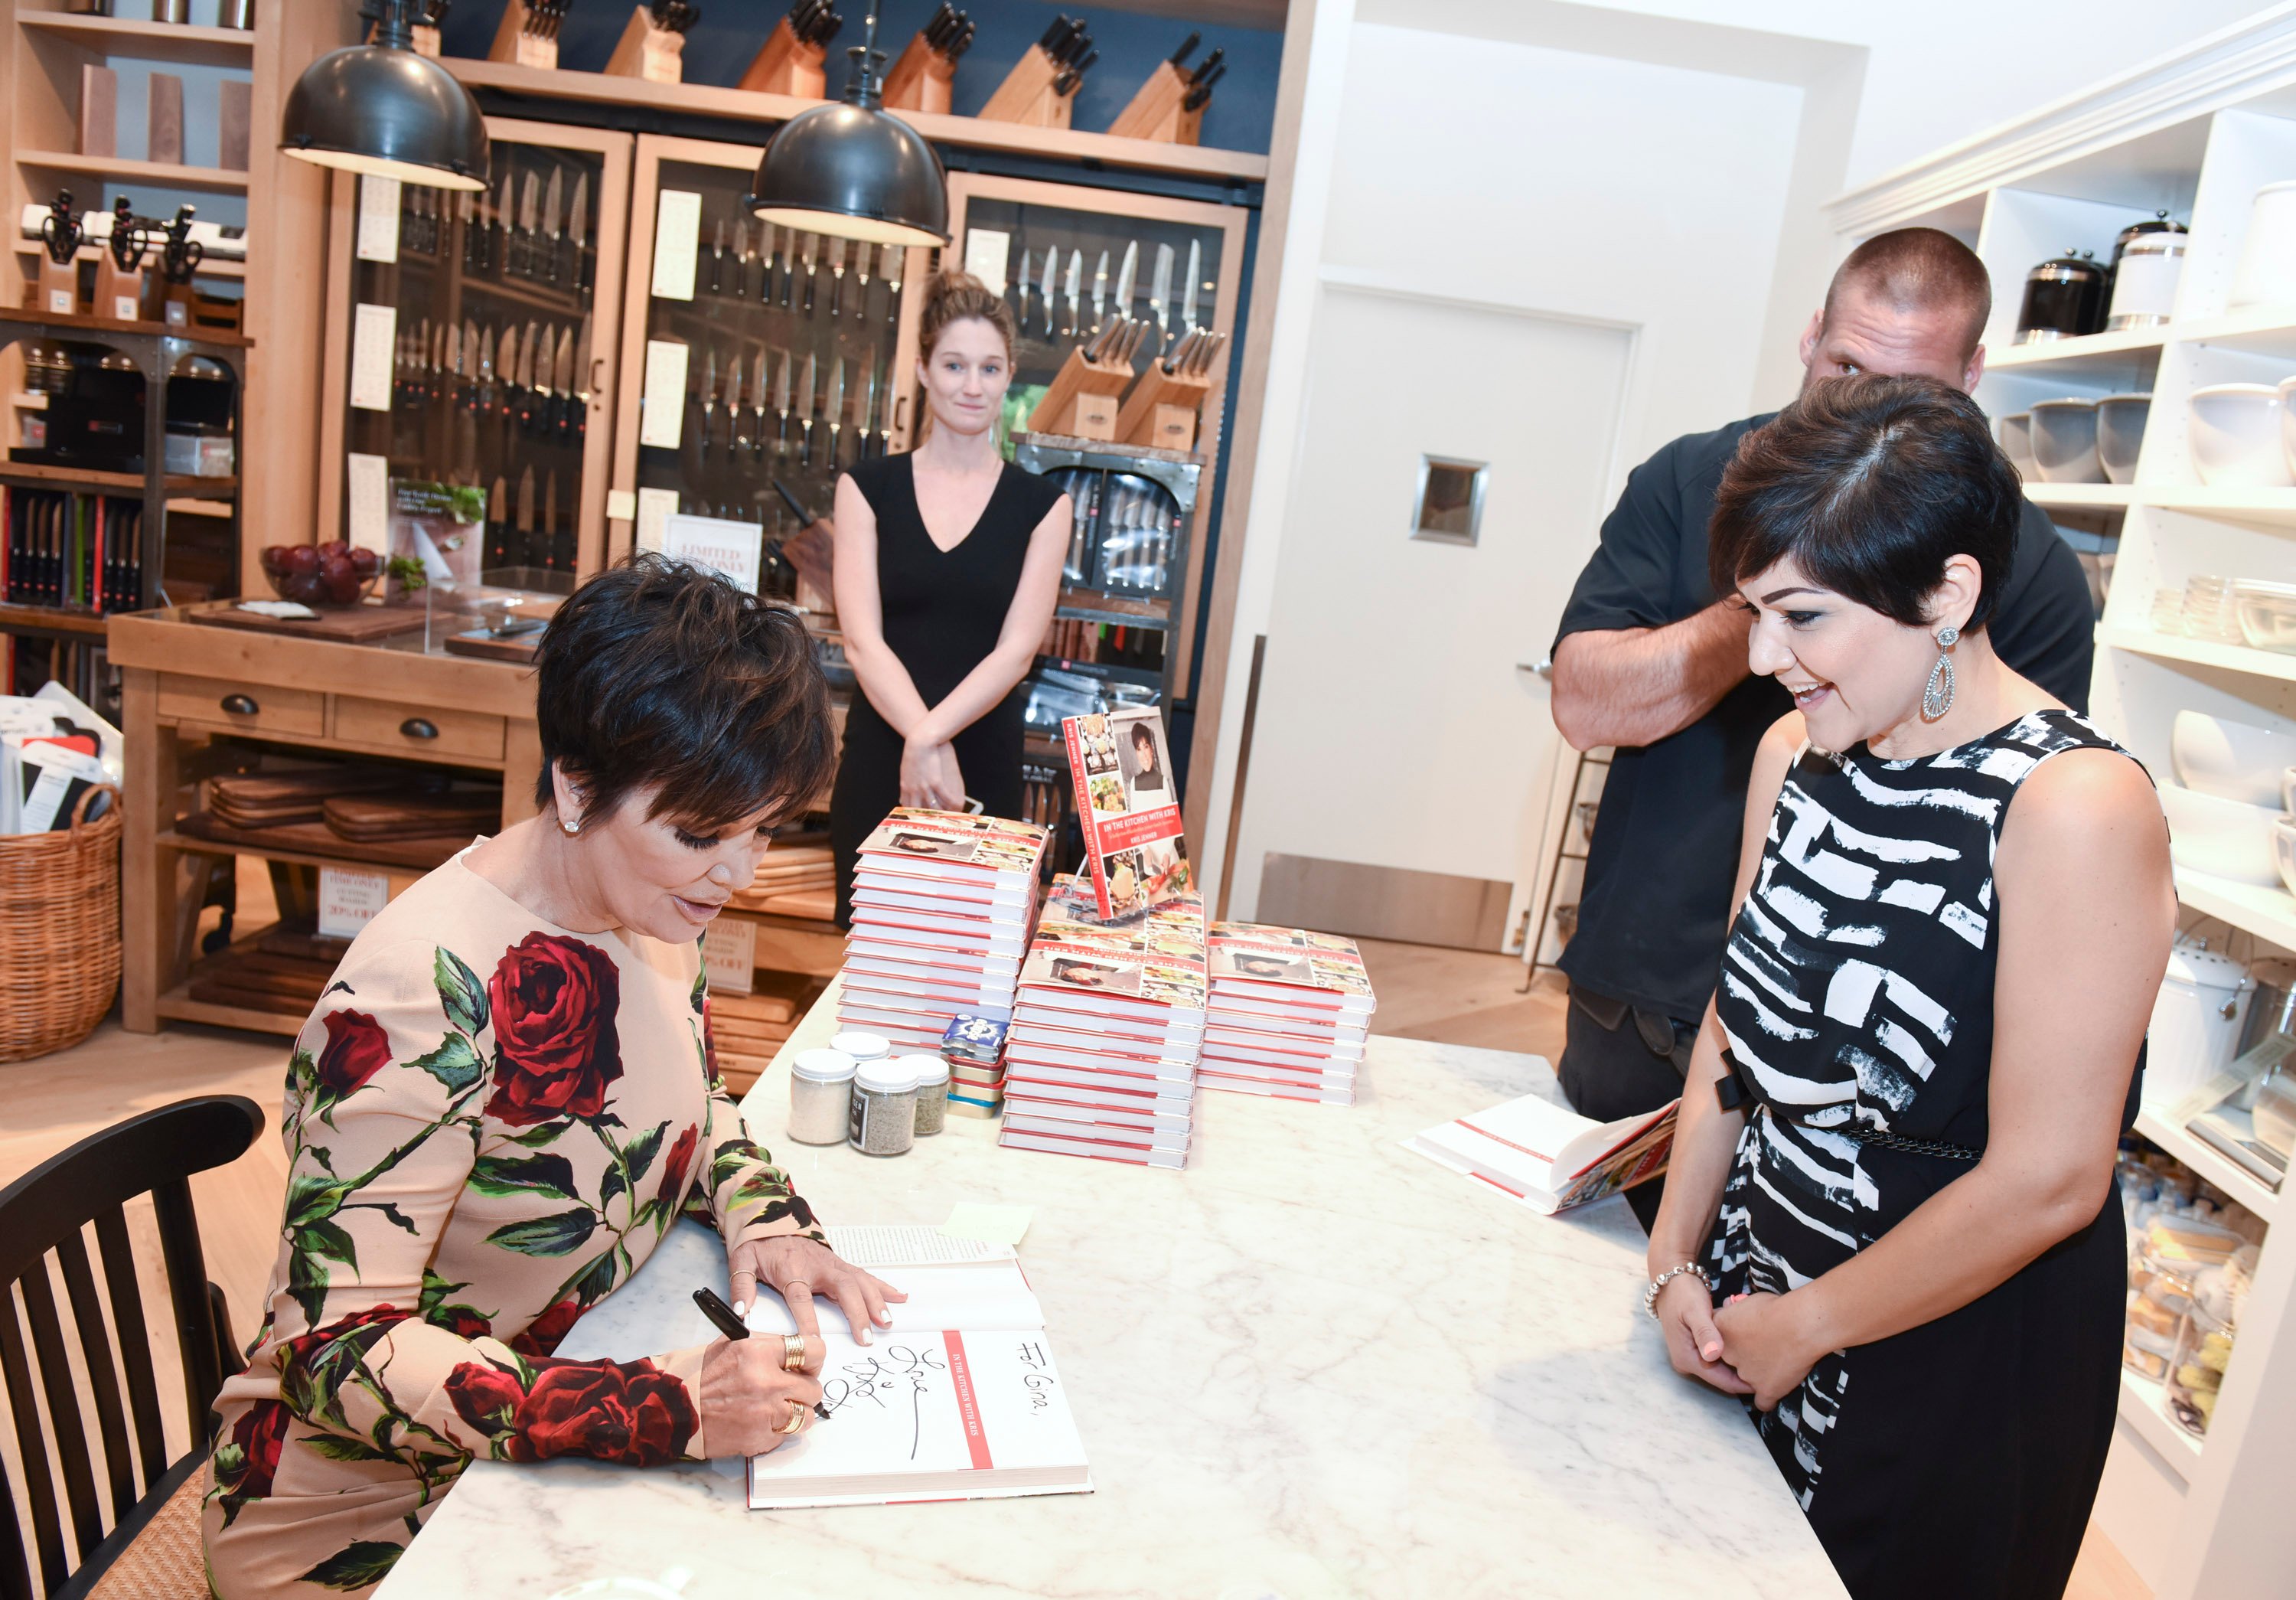 Kris Jenner signing her cookbook at an event in 2014.